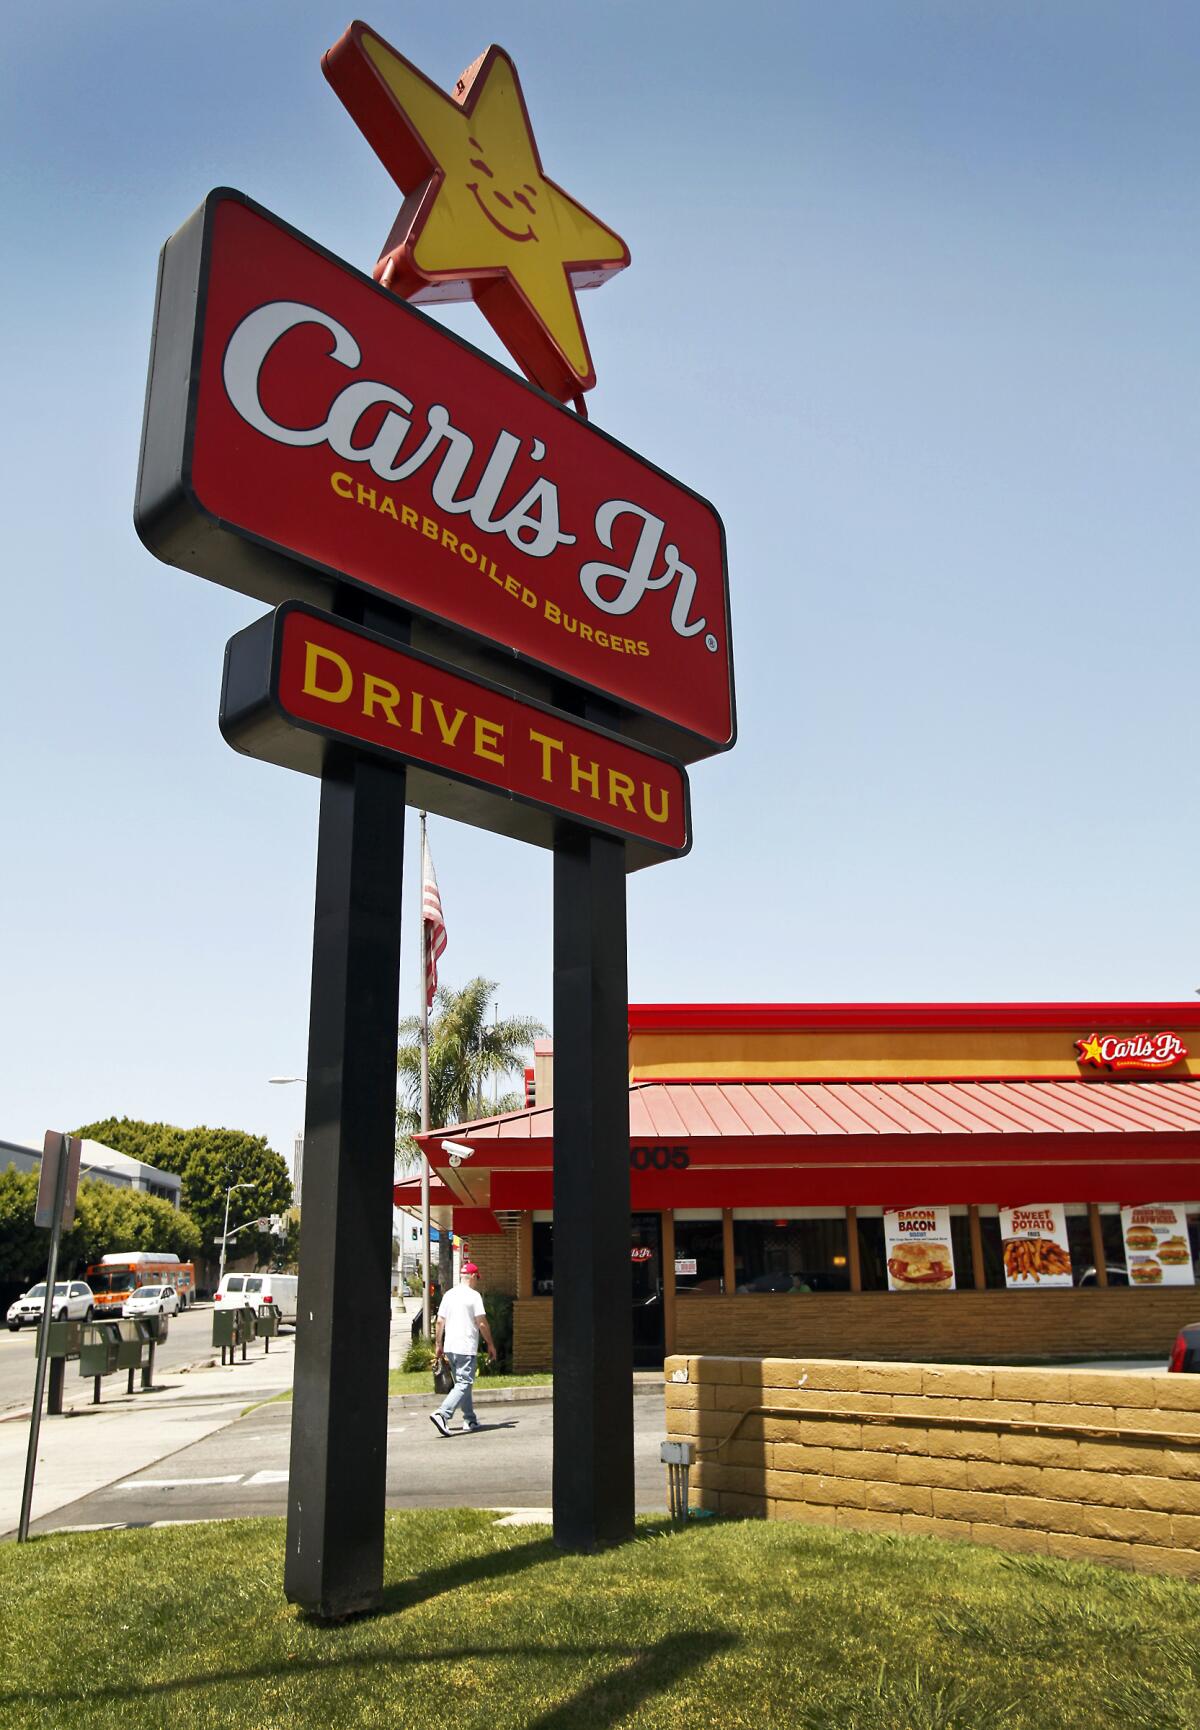 The Carl's Jr. sign and restaurant restaurant located at 3005 West 6th Street in Los Angeles